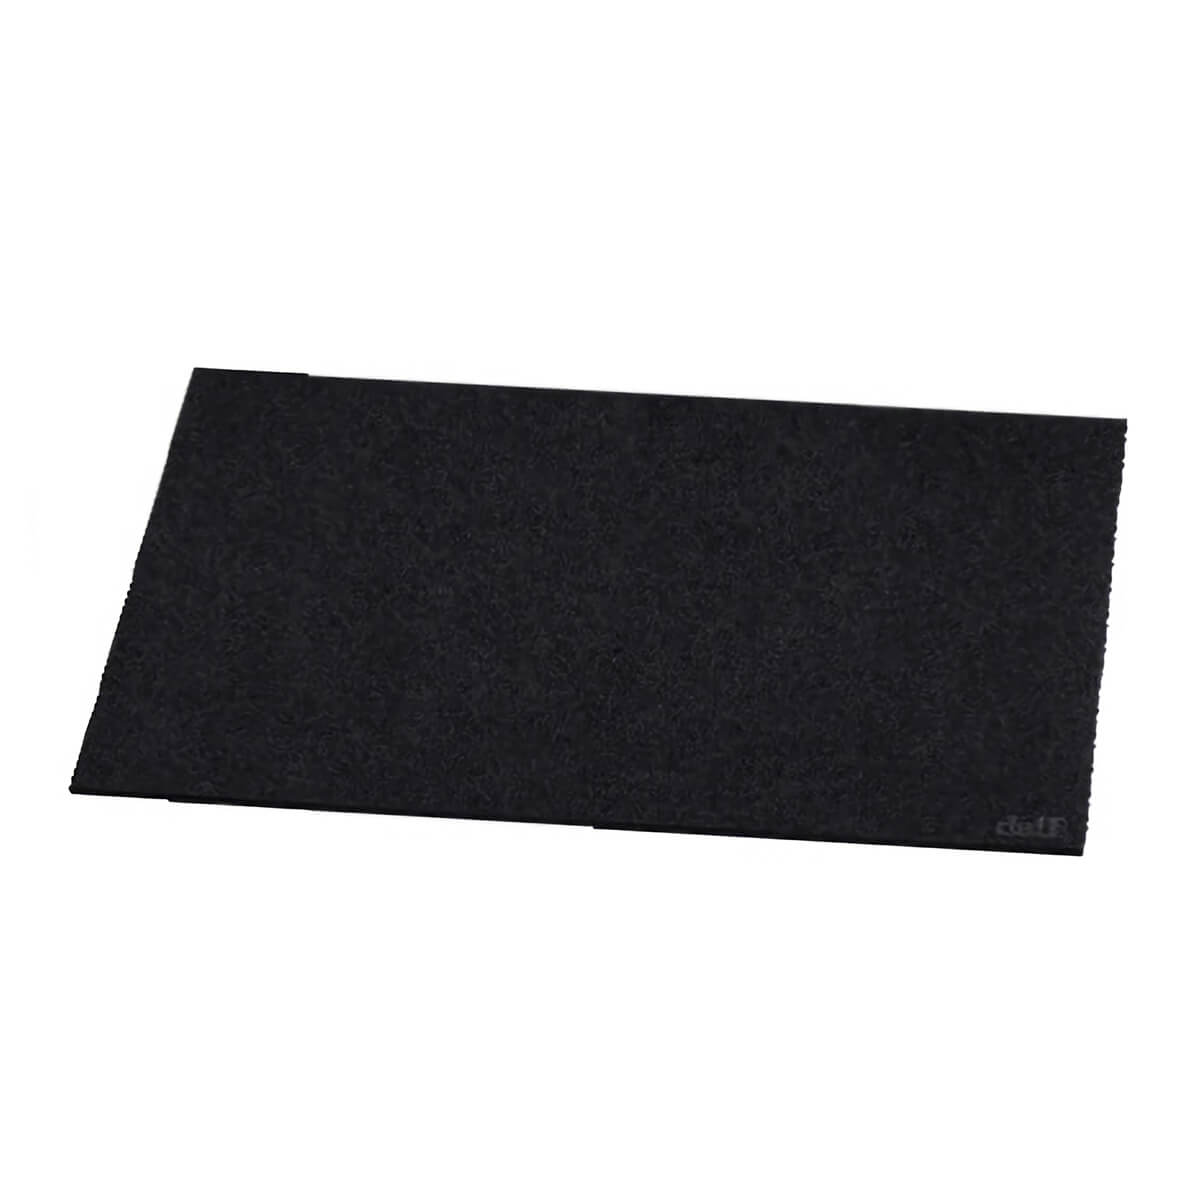 13 x 13 Square 3mm Thick Merino Wool Felt Placemats